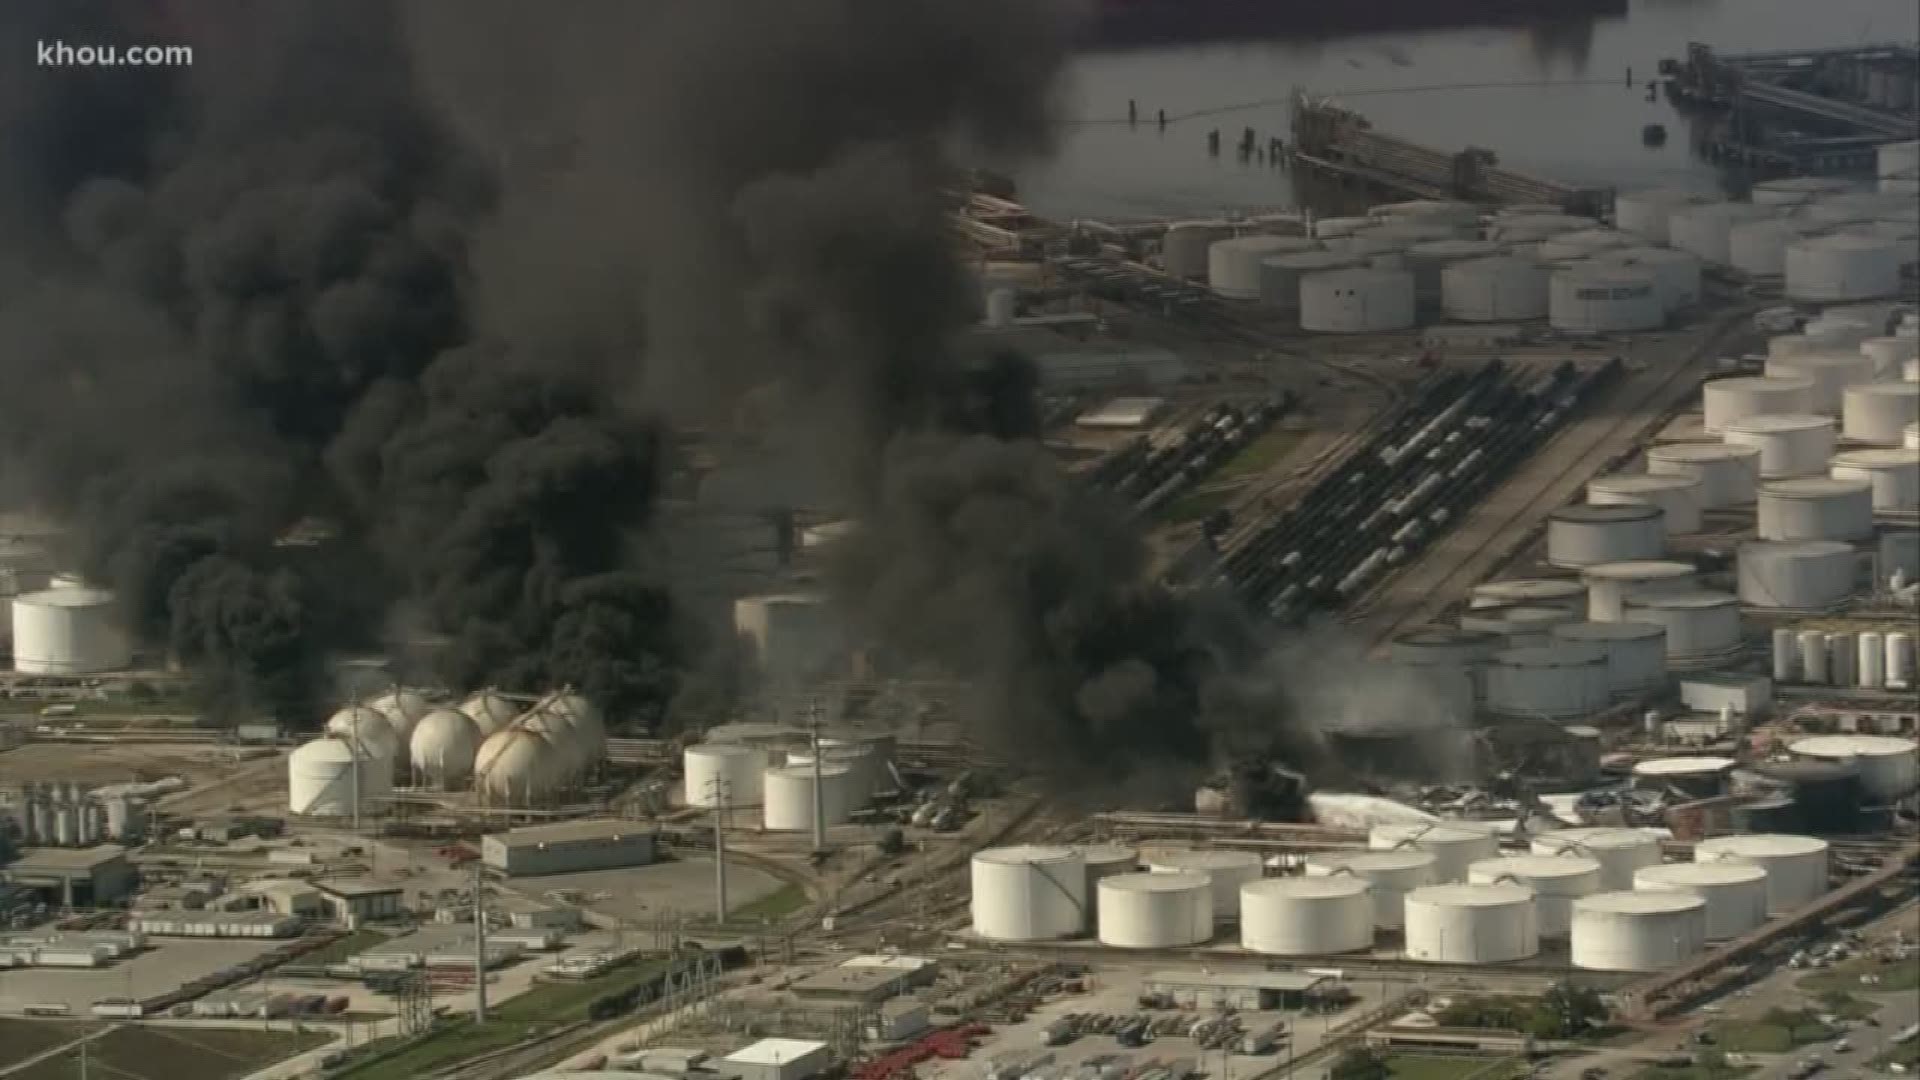 People in Deer Park are wondering what happens next. Gov. Greg Abbott tweeted Friday "polluters will be punished." The state of Texas is suing the International Terminals Company where the fire started.